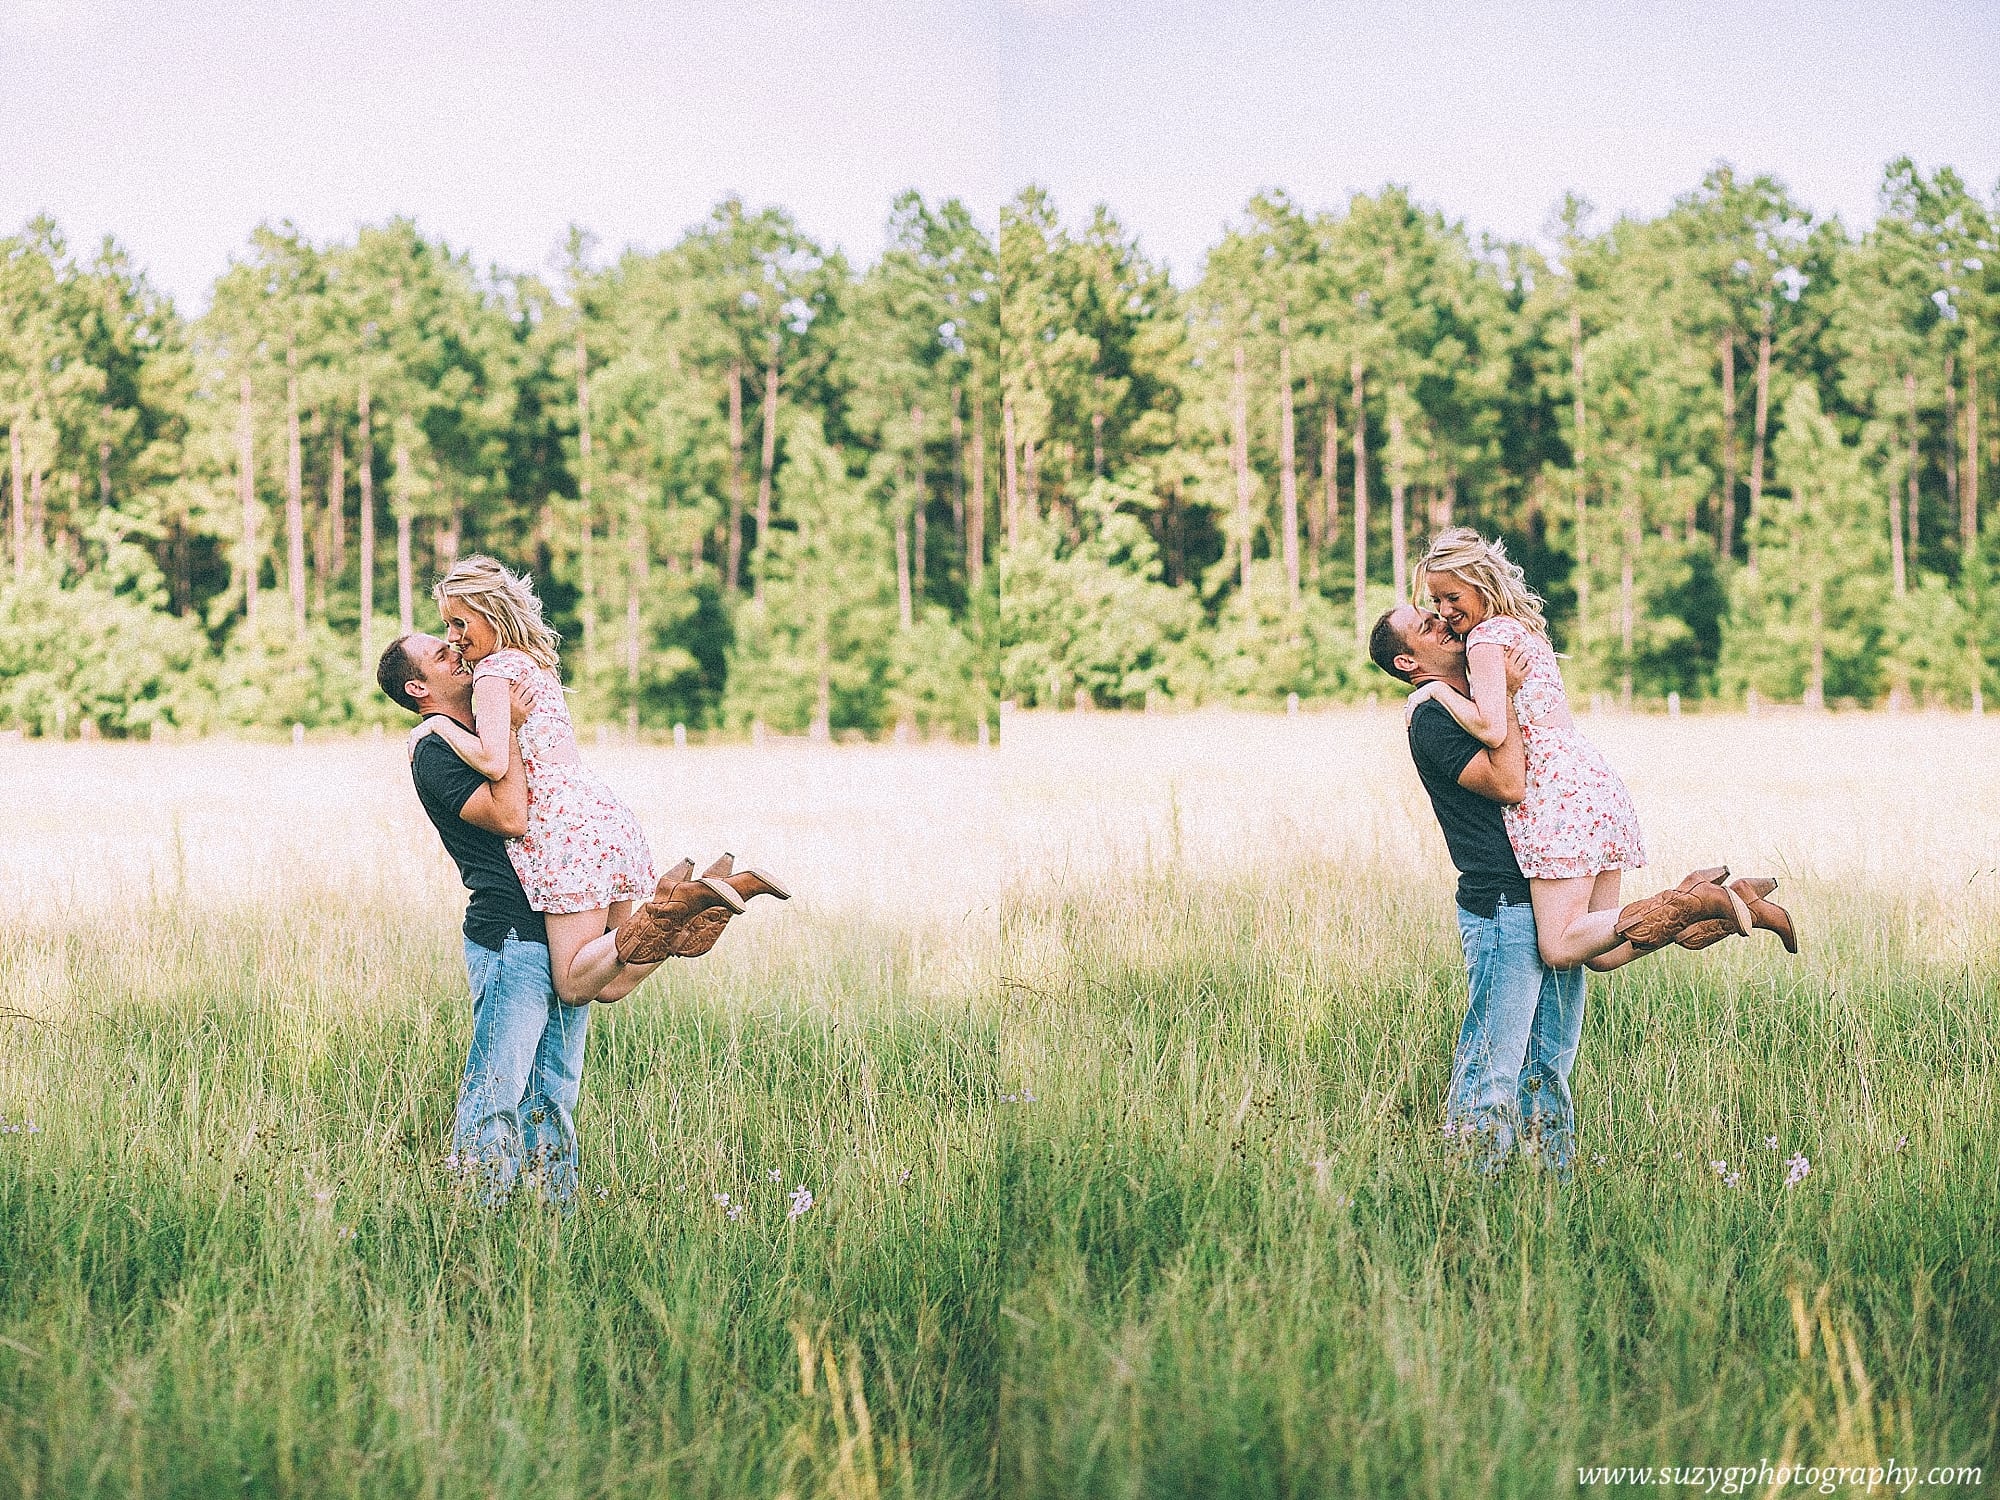 engagements-new orleans-texas-baton rouge-lake charles-suzy g-photography-suzygphotography_0010